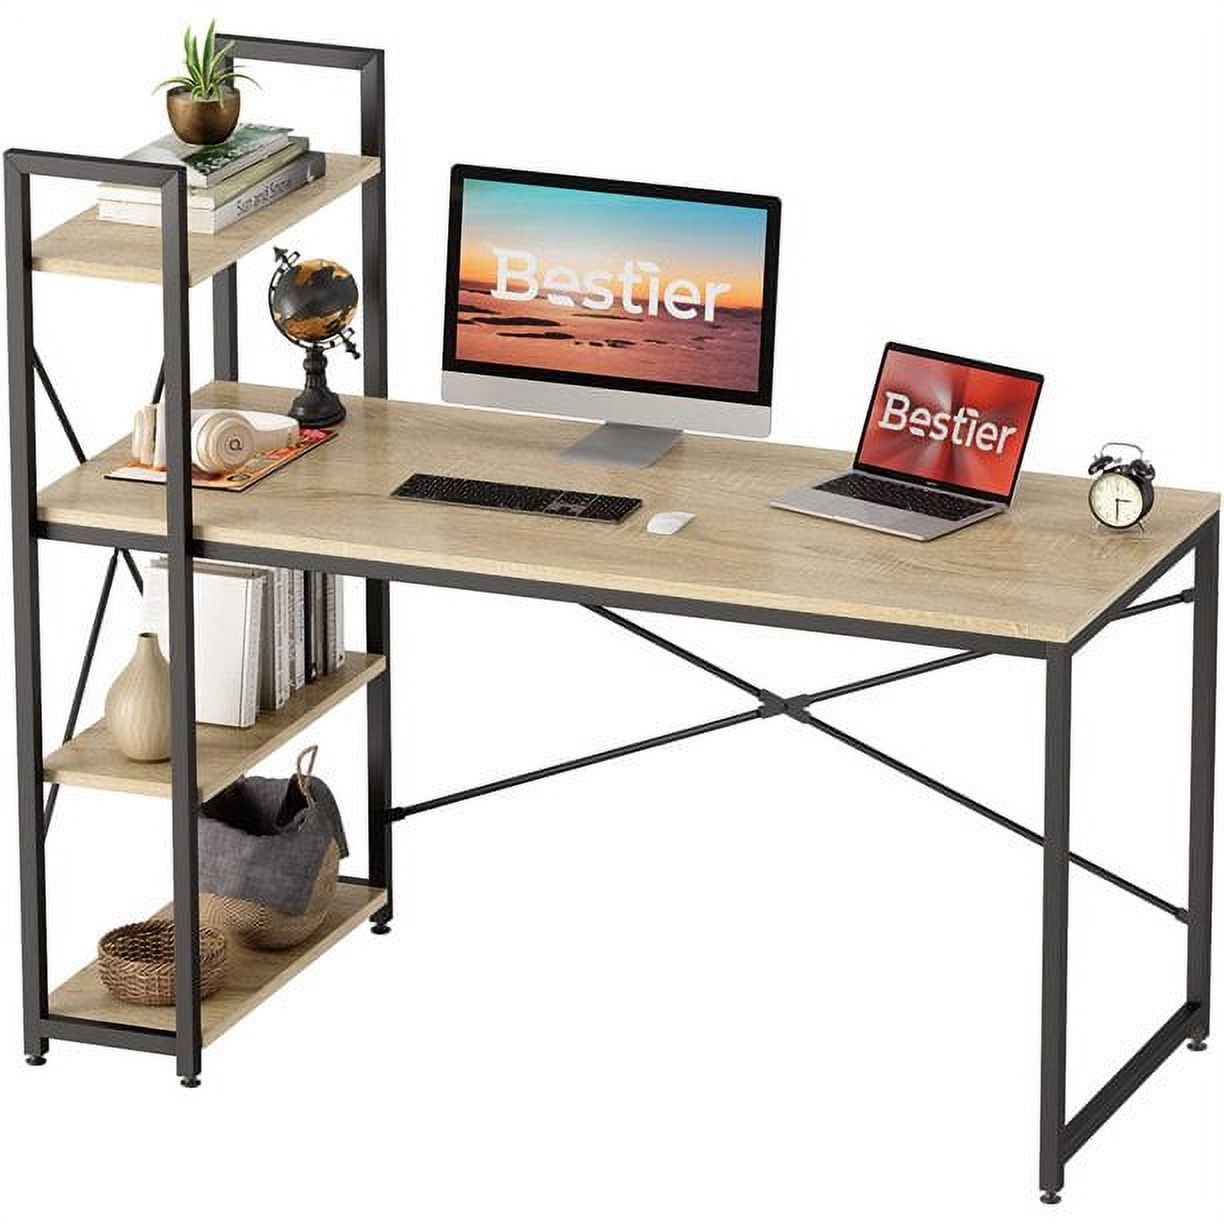 Bestier 55 inch Computer Desk with 4-Tier Shelves Craft Table Writing Study Table, Oak - image 3 of 10